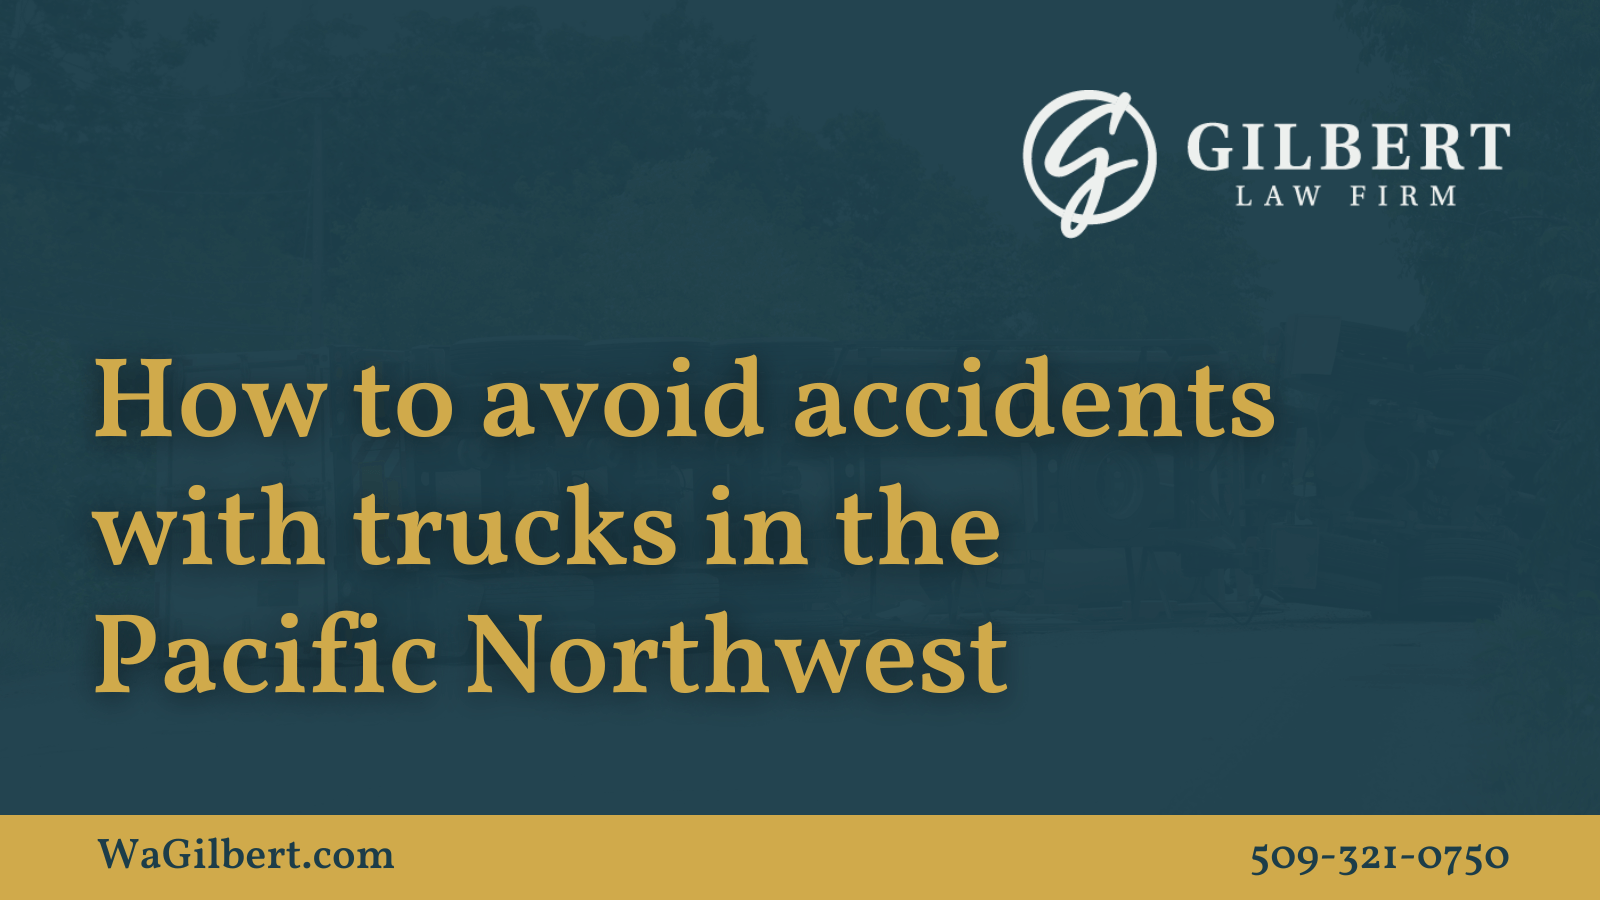 How to avoid accidents with trucks in the Pacific Northwest | Gilbert Law Firm Spokane Washington